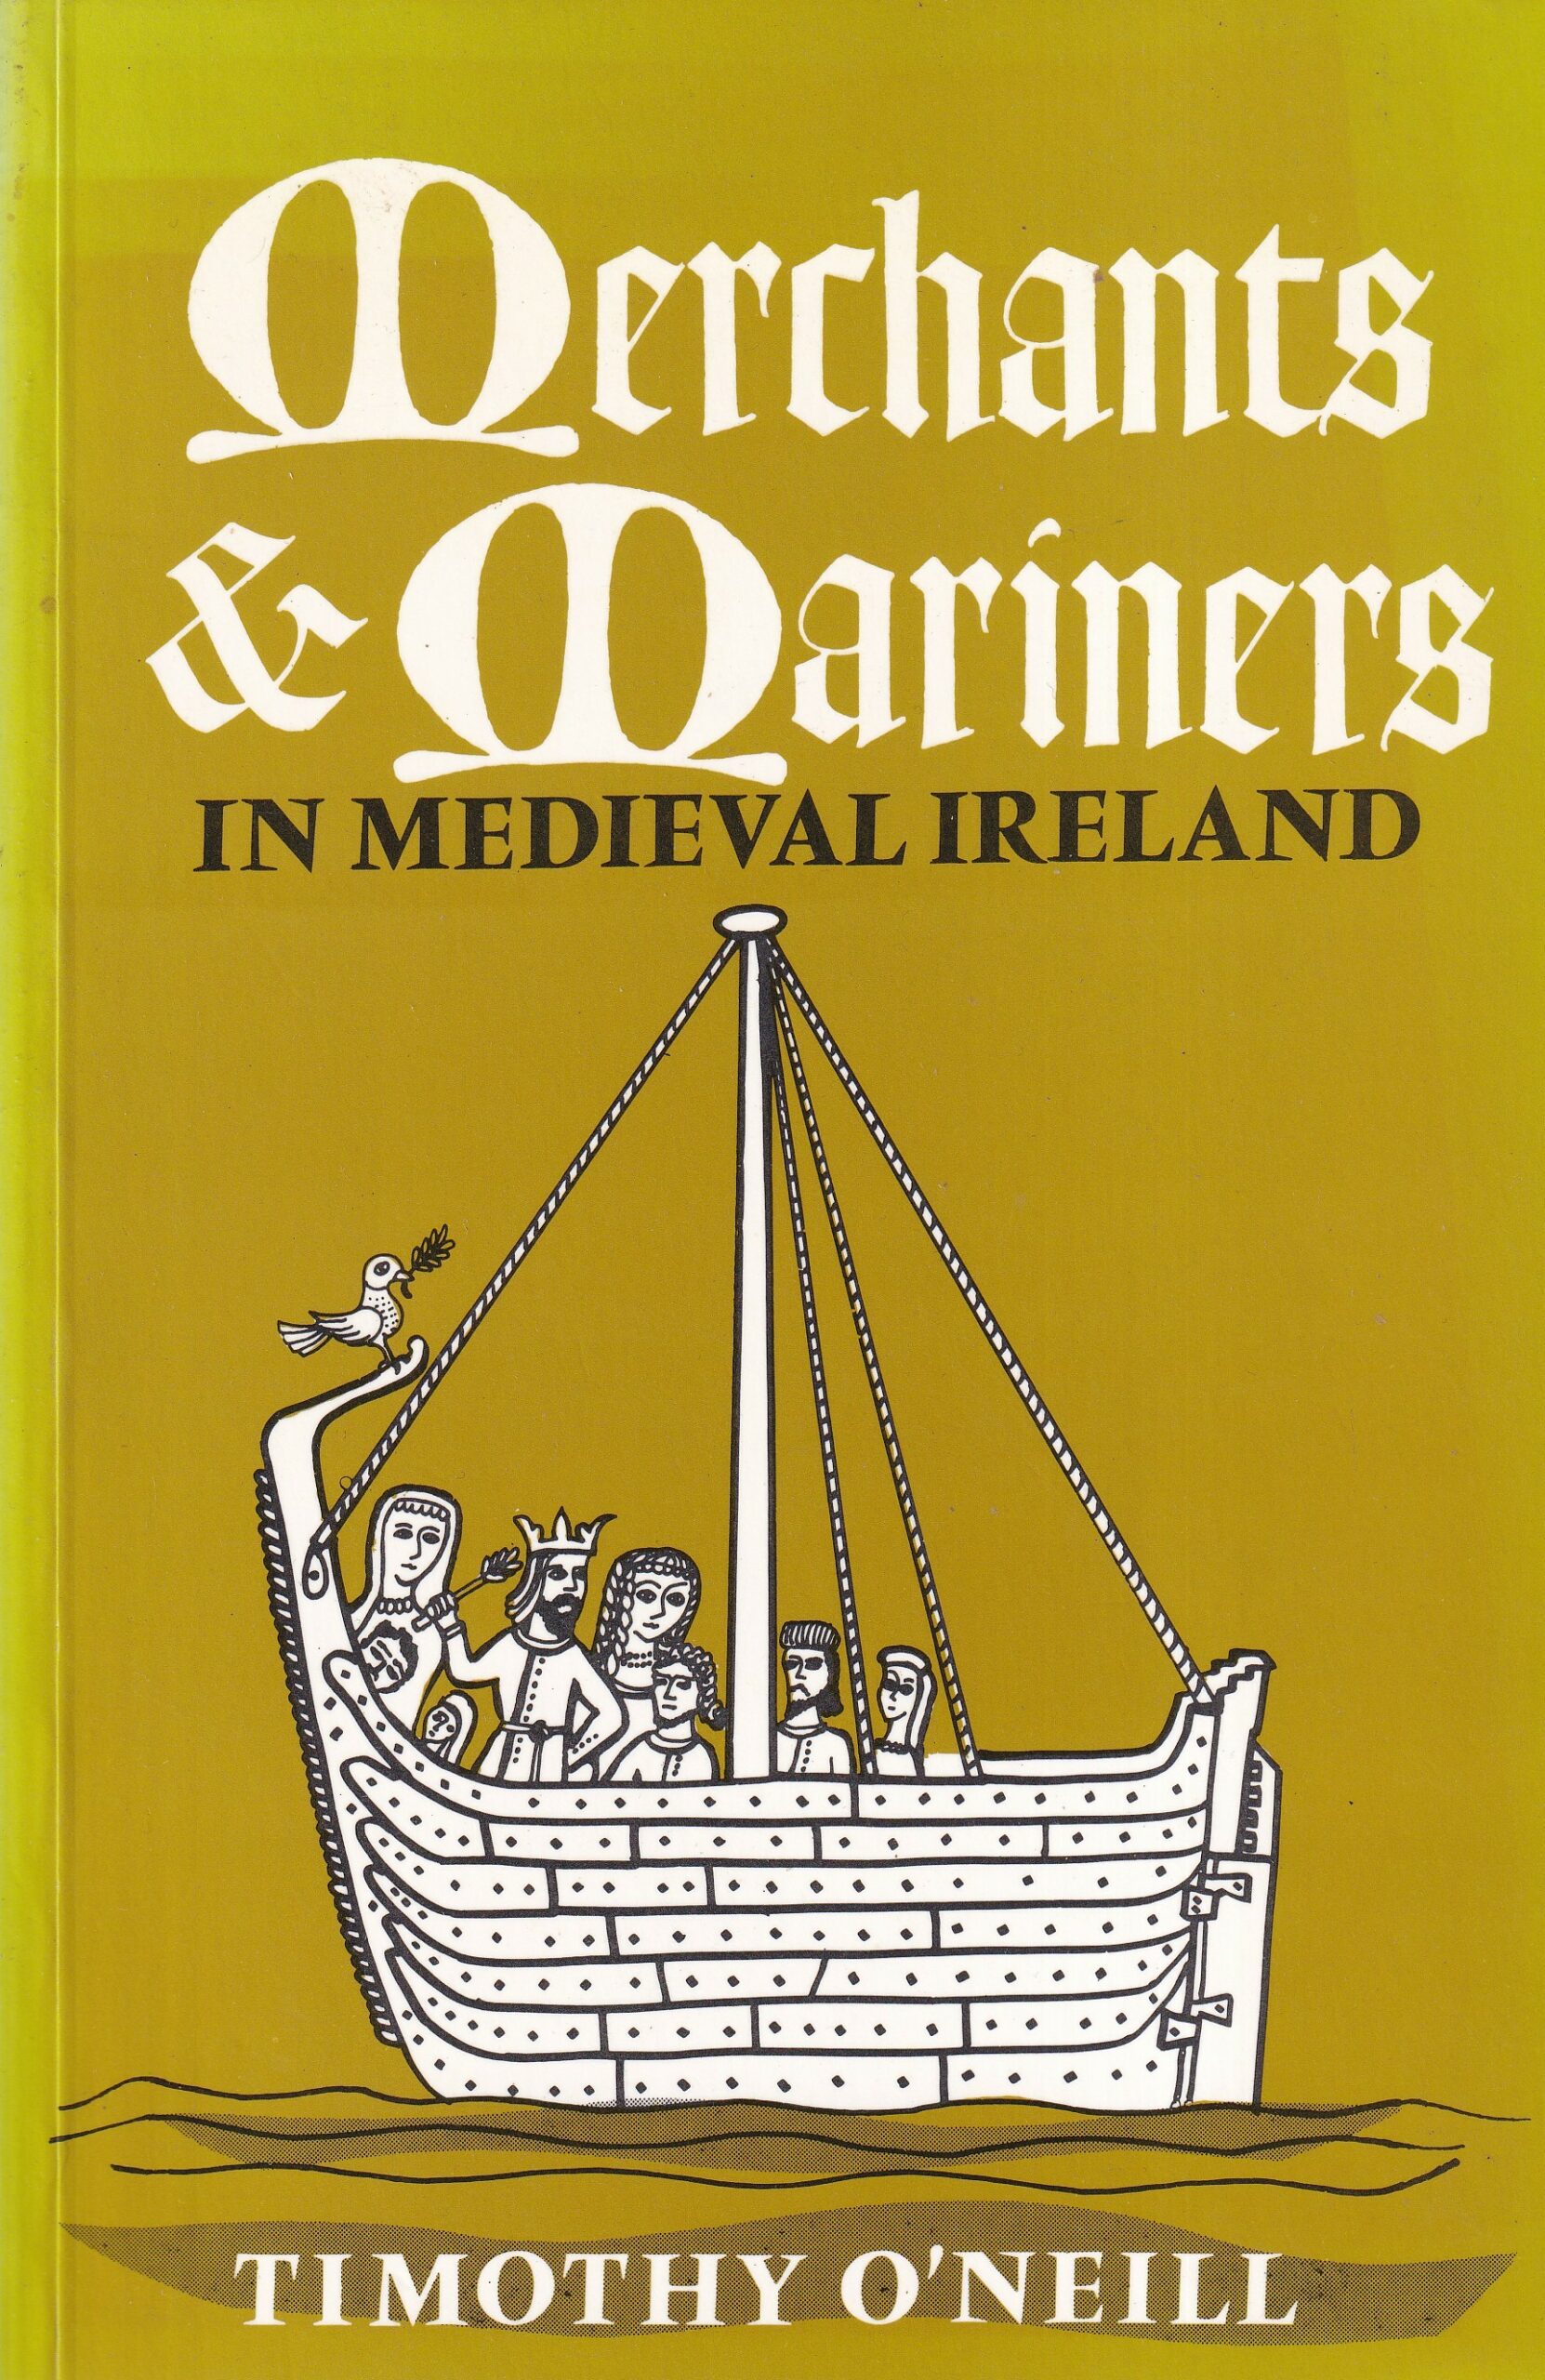 Merchants and Mariners in Medieval Ireland (signed) | Timothy O'Neill | Charlie Byrne's